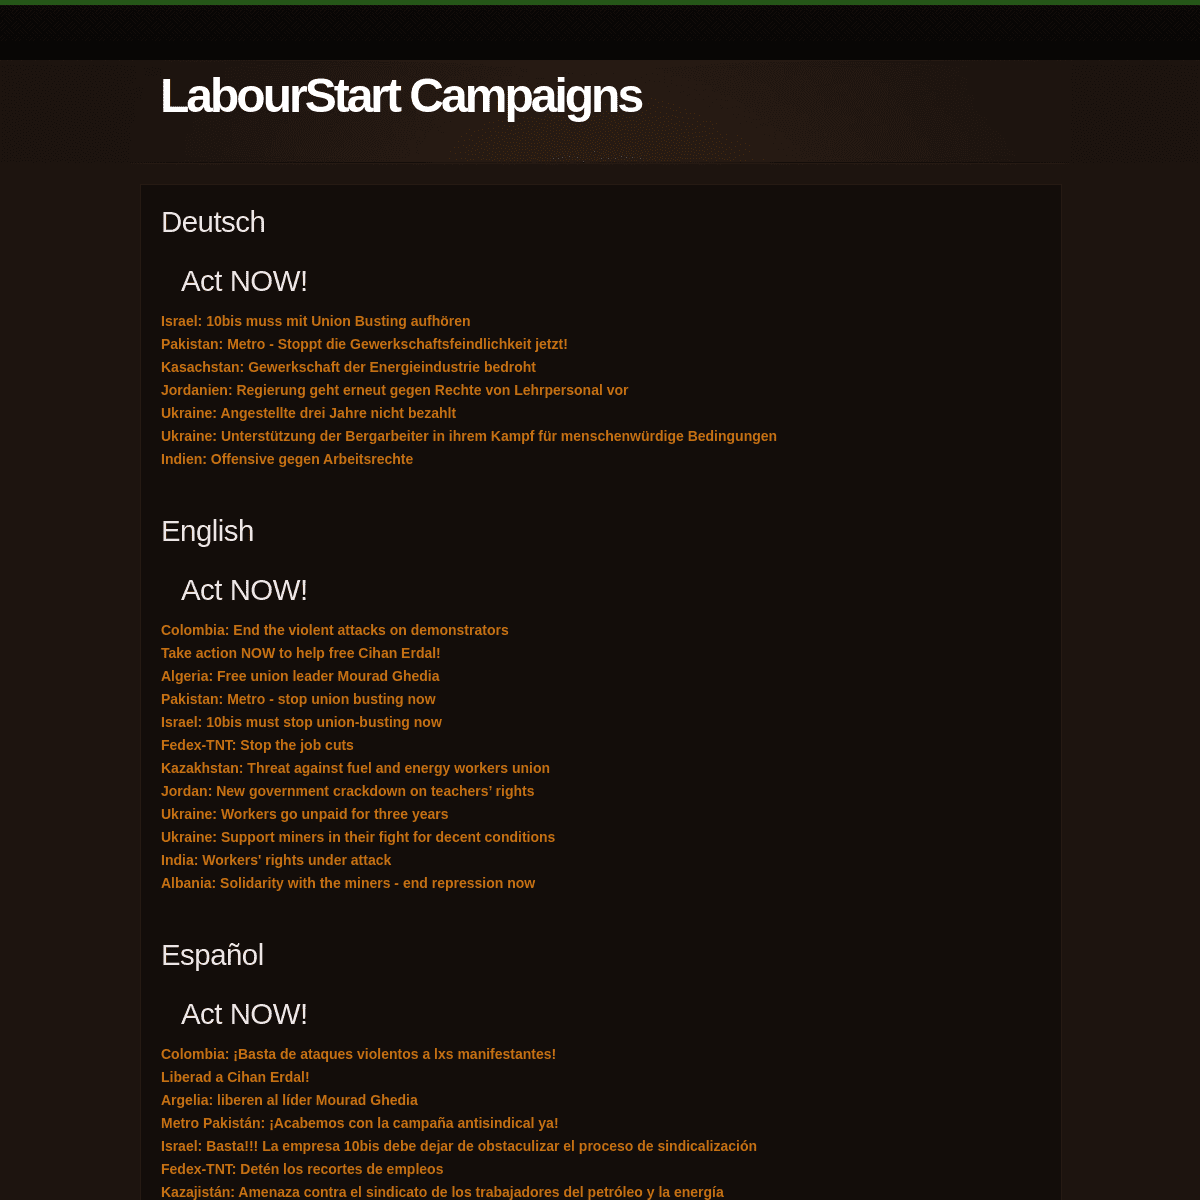 A complete backup of https://labourstartcampaigns.net